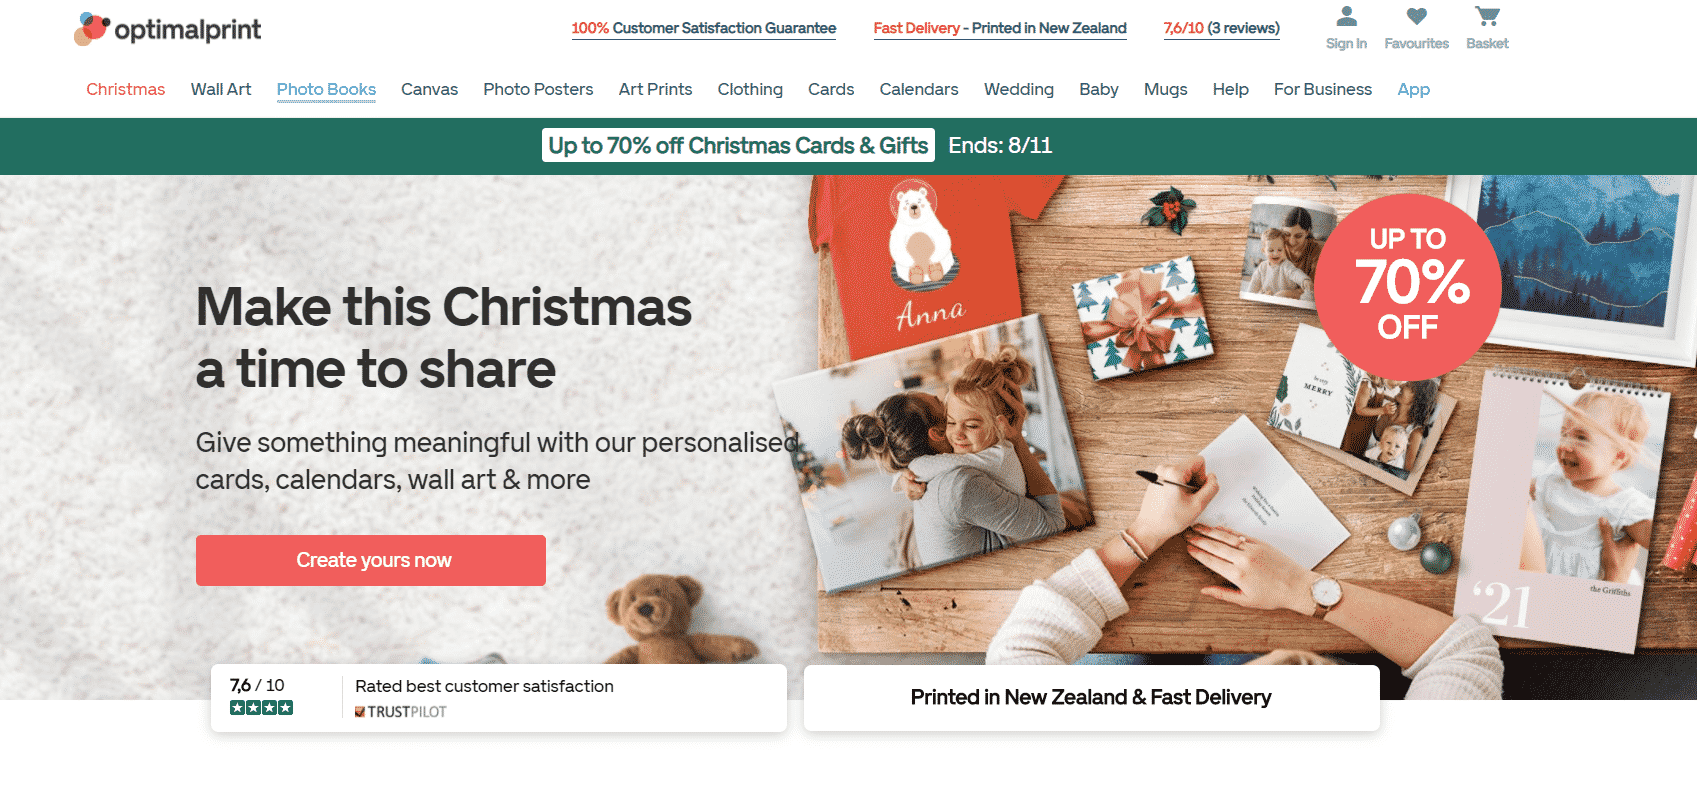 Holiday email marketing landing page